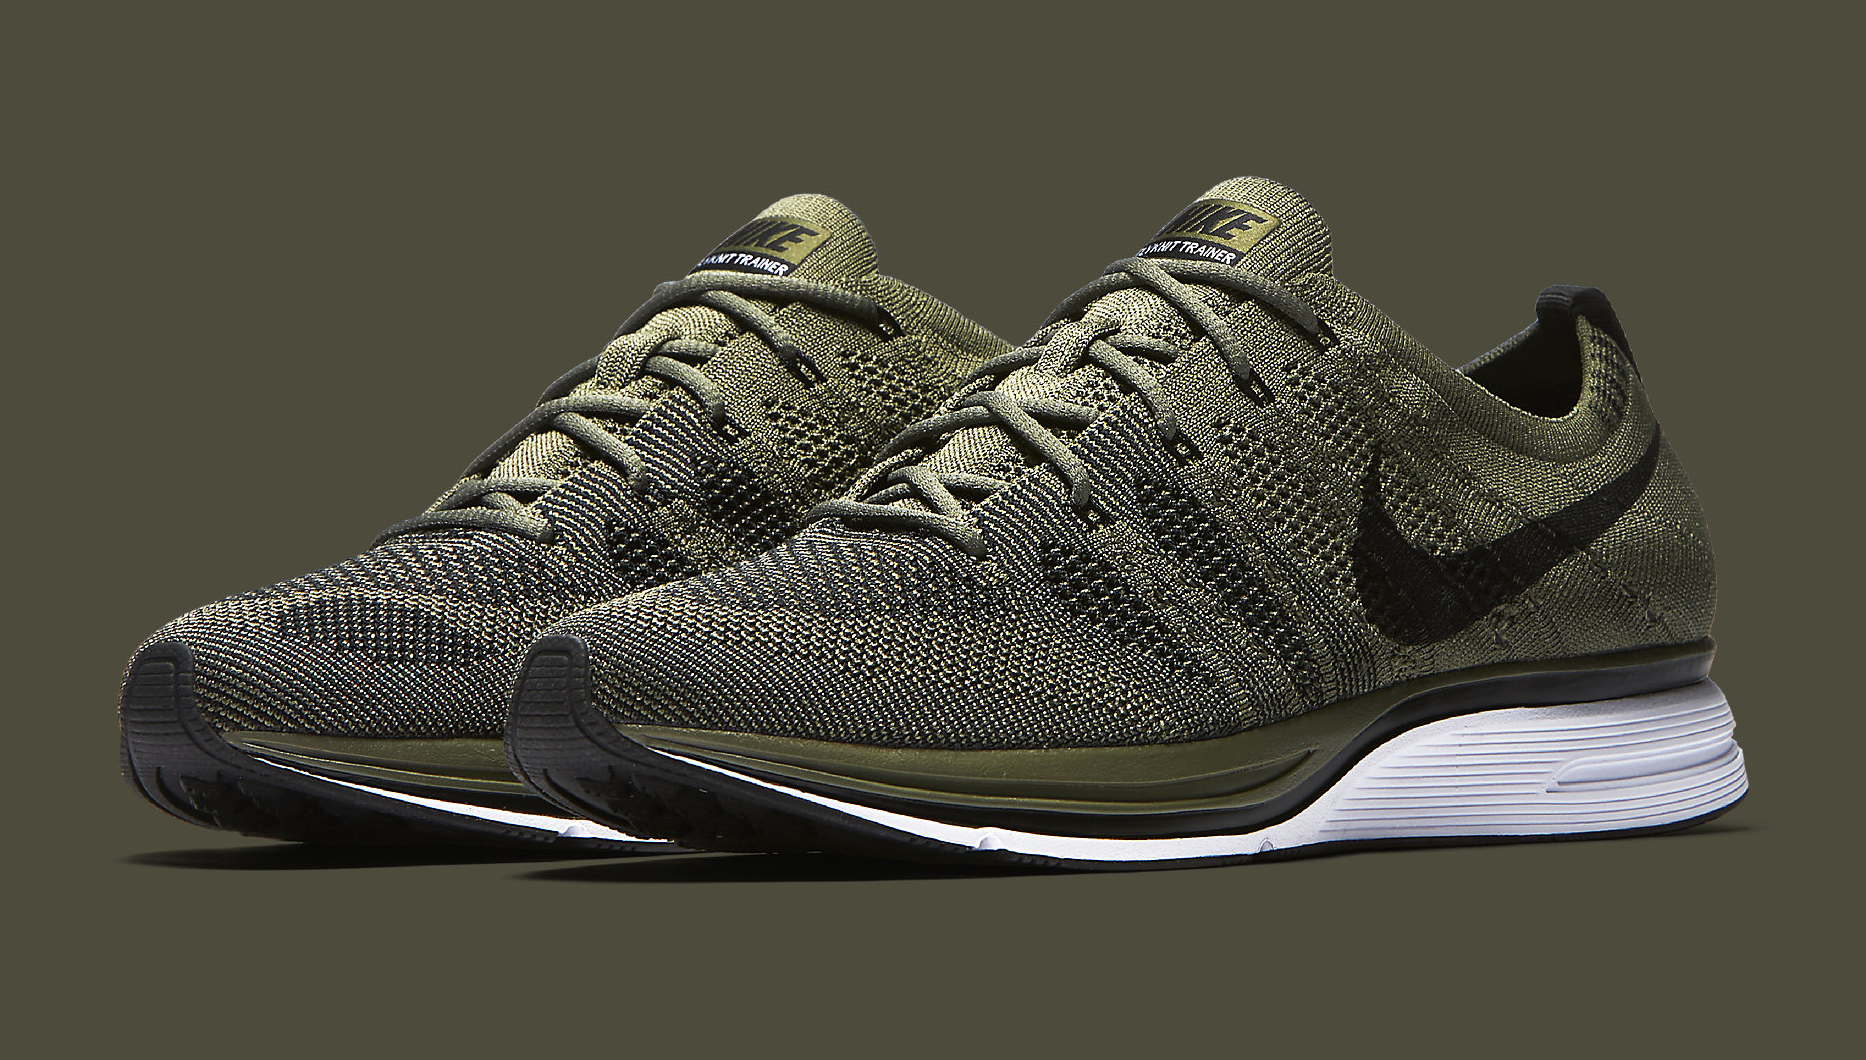 Nike Flyknit Trainer Olive AH8396-200 | Sole Collector